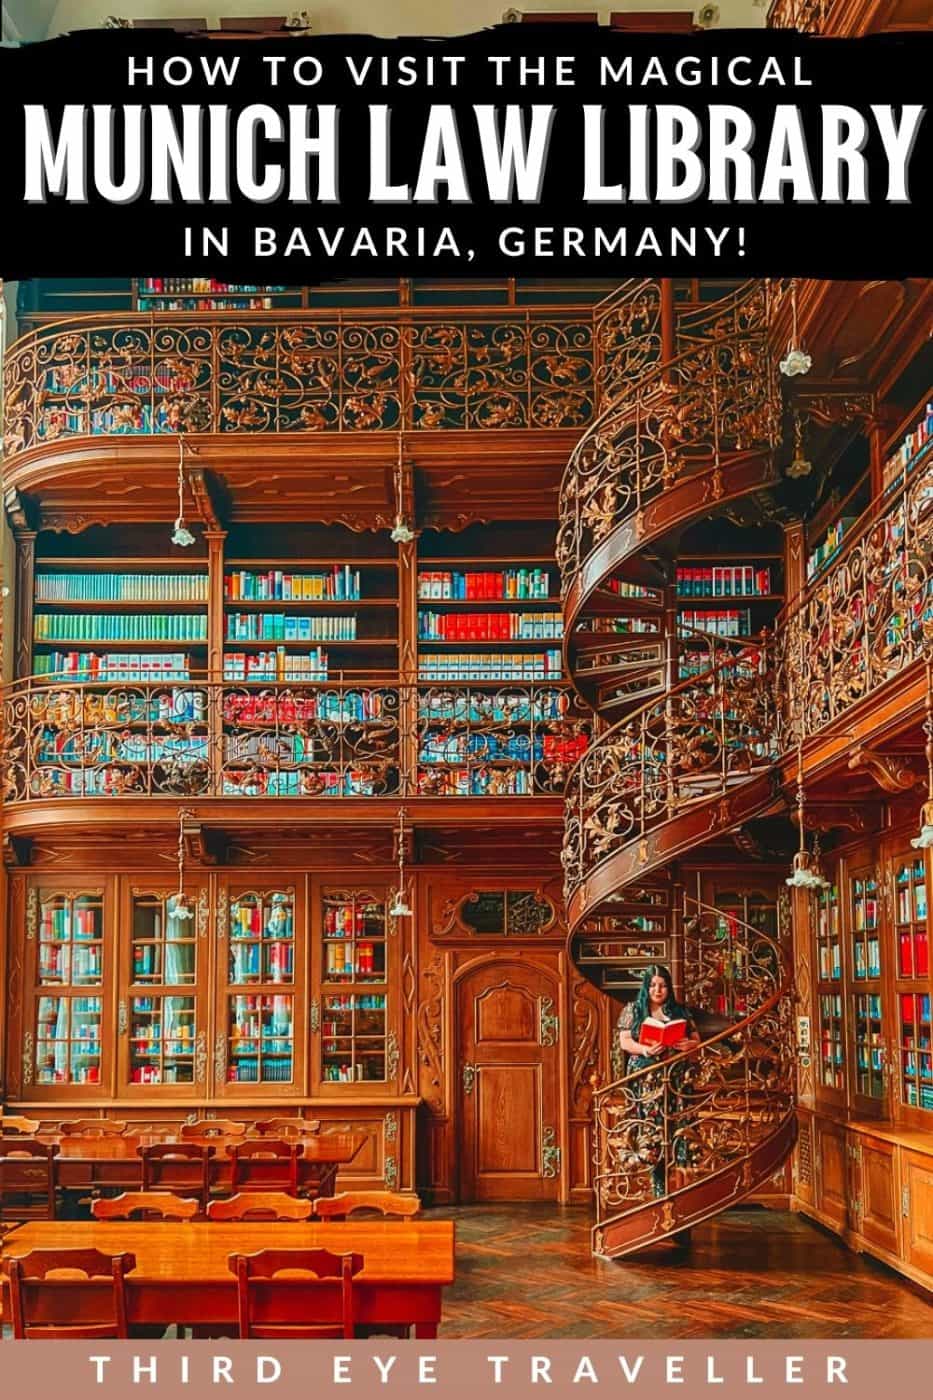 How to visit the munich law library bavaria germany